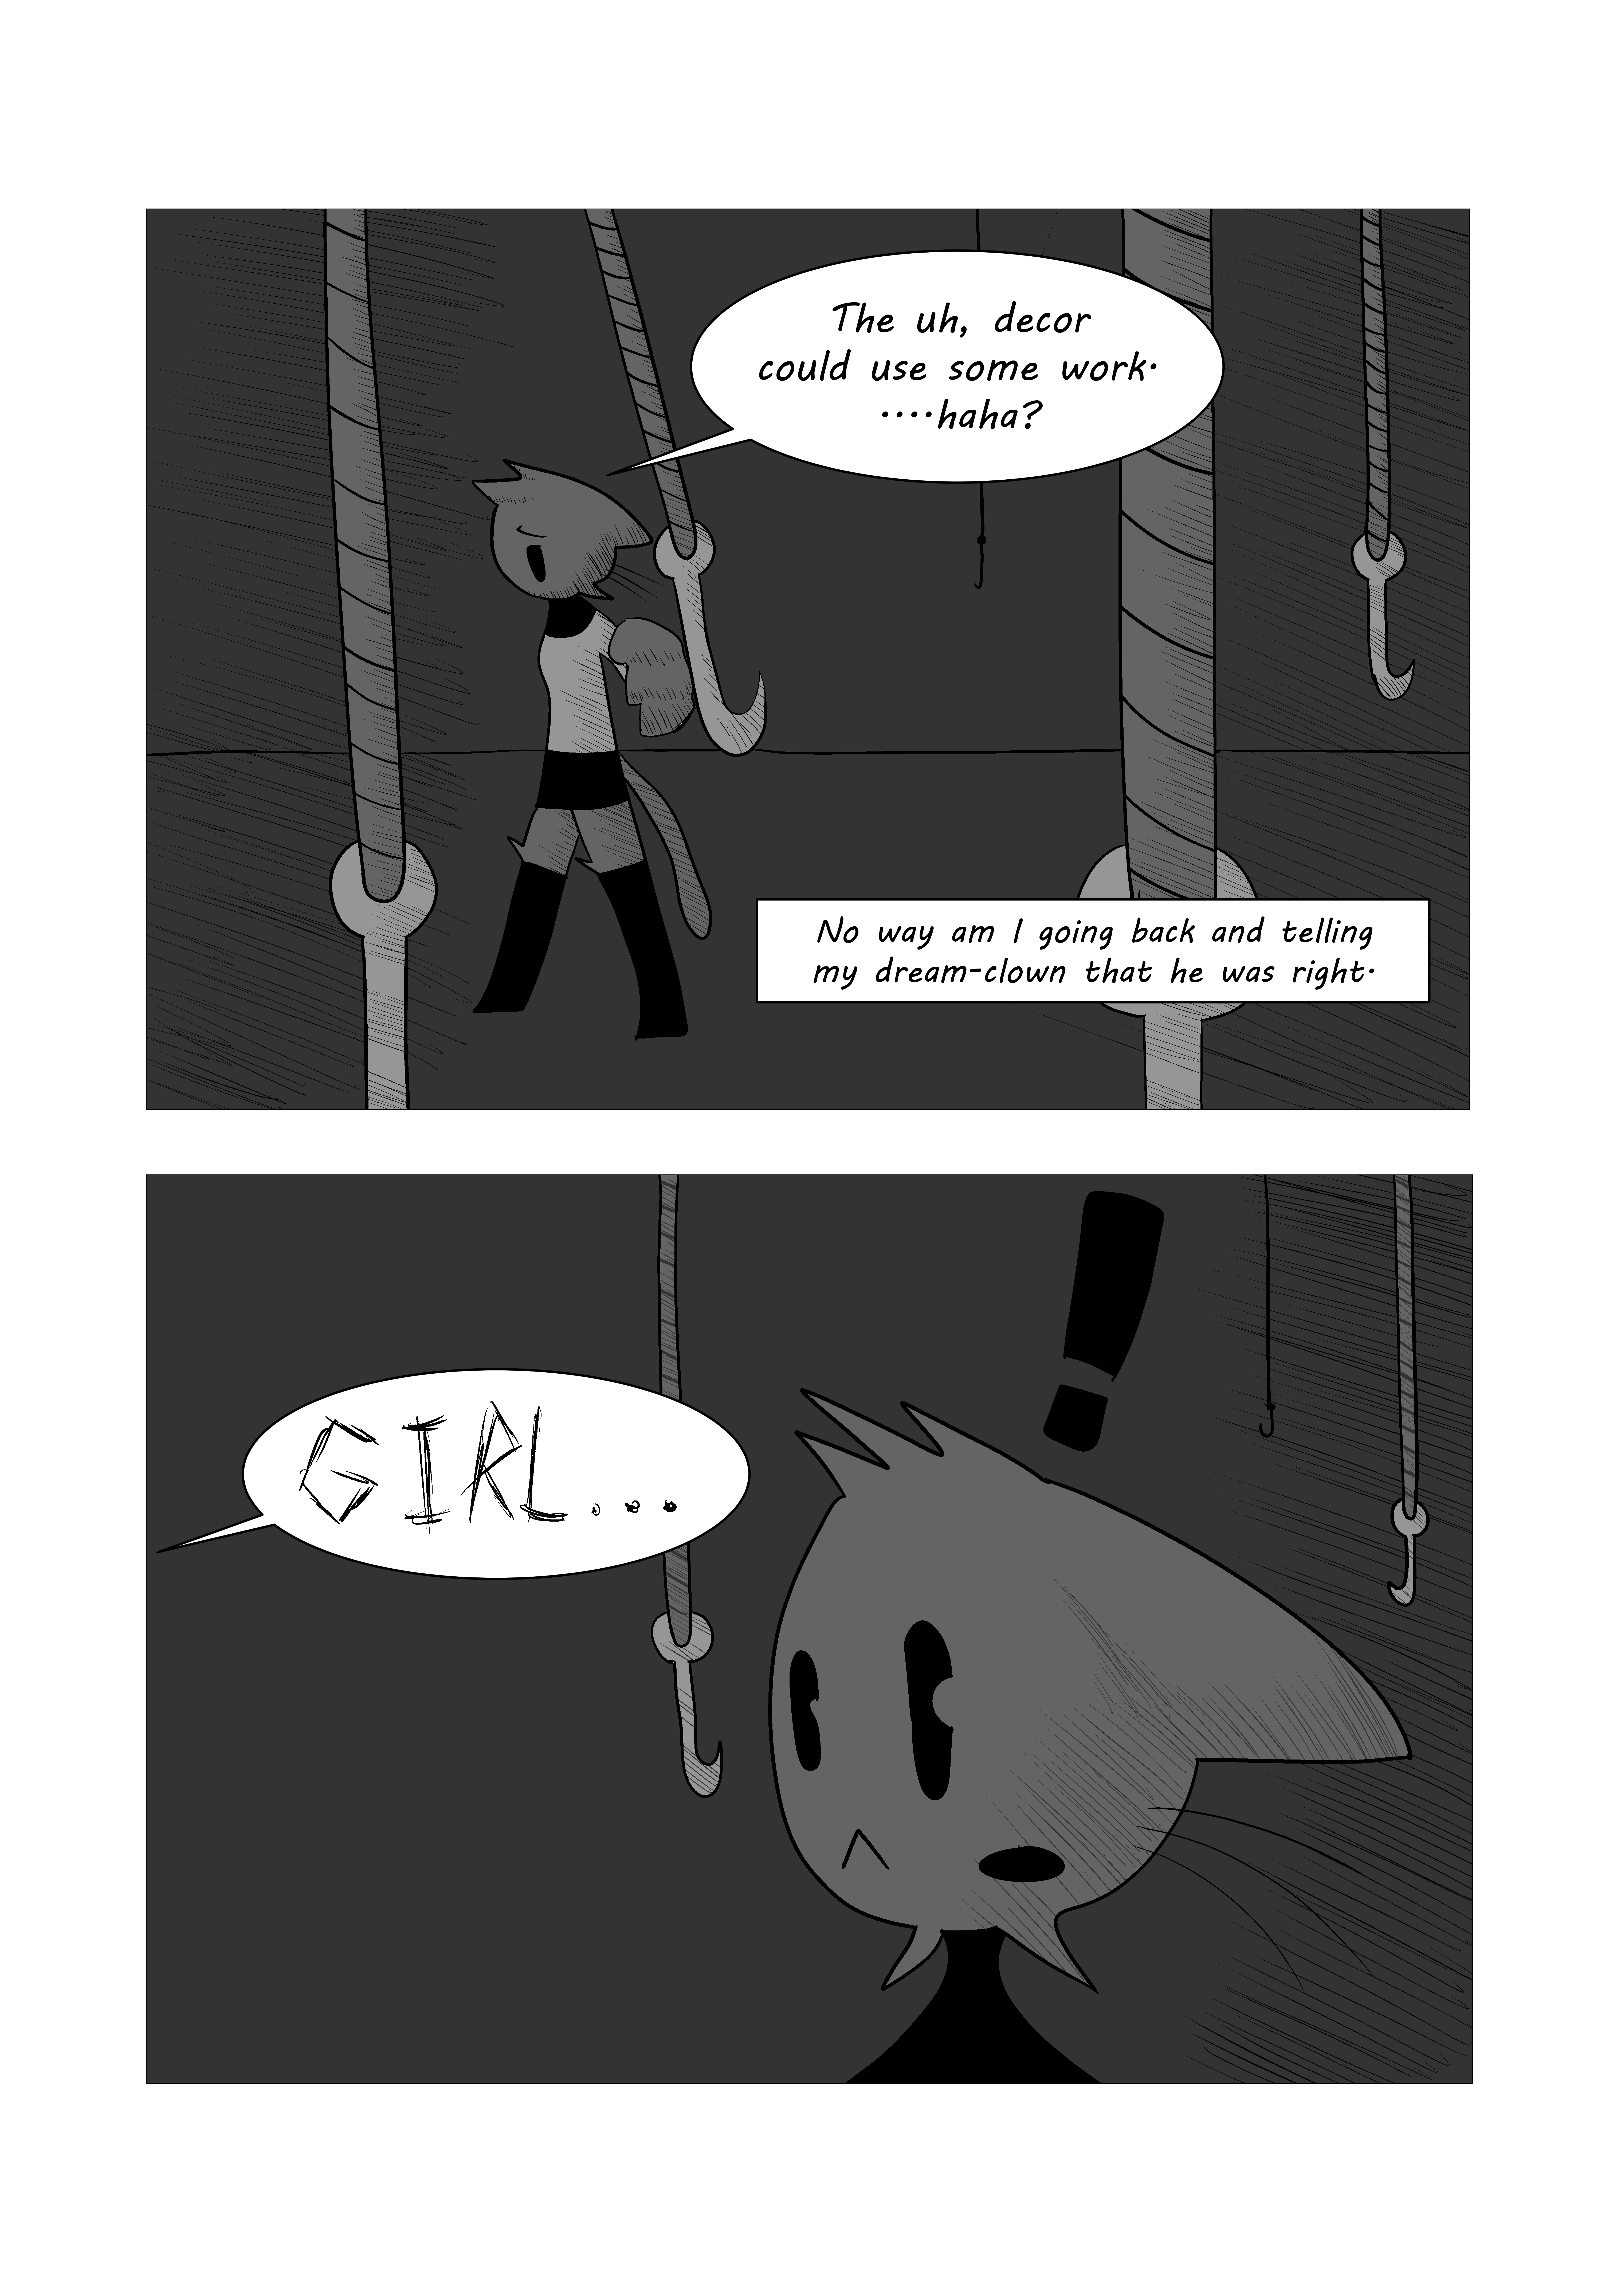 Page 22: The clown was right?